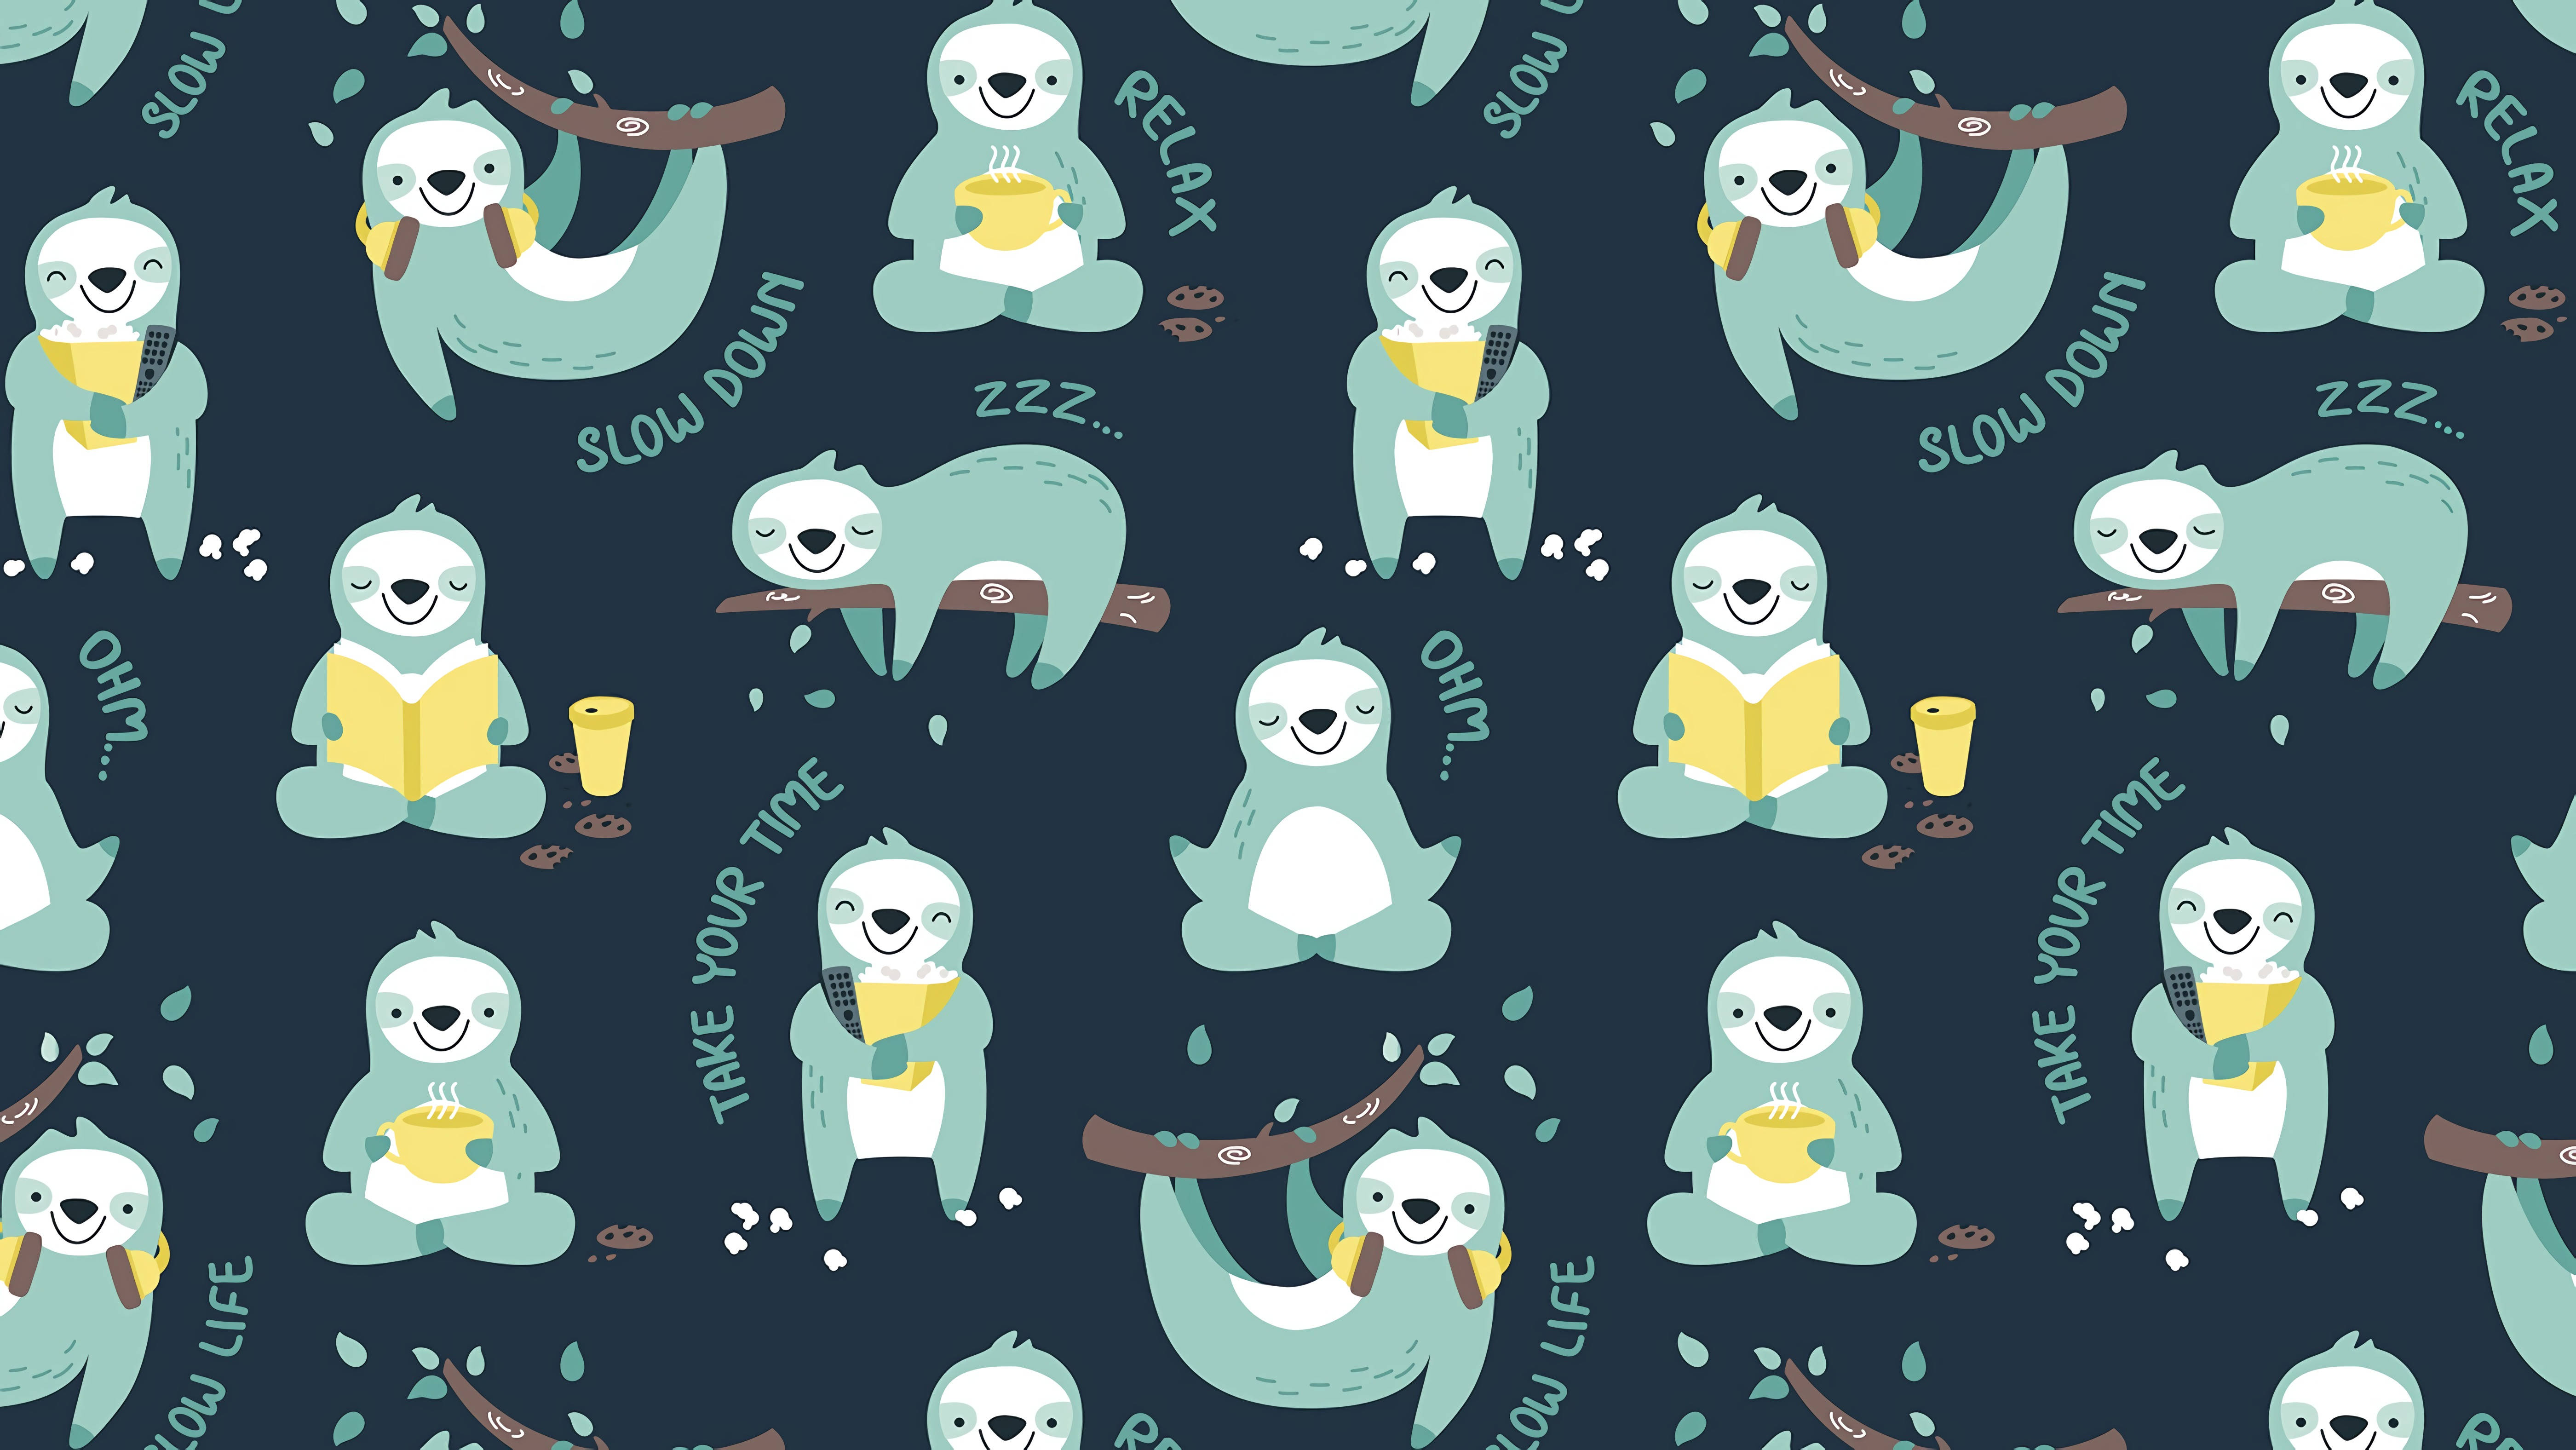 Humorous Sloth Poster Background